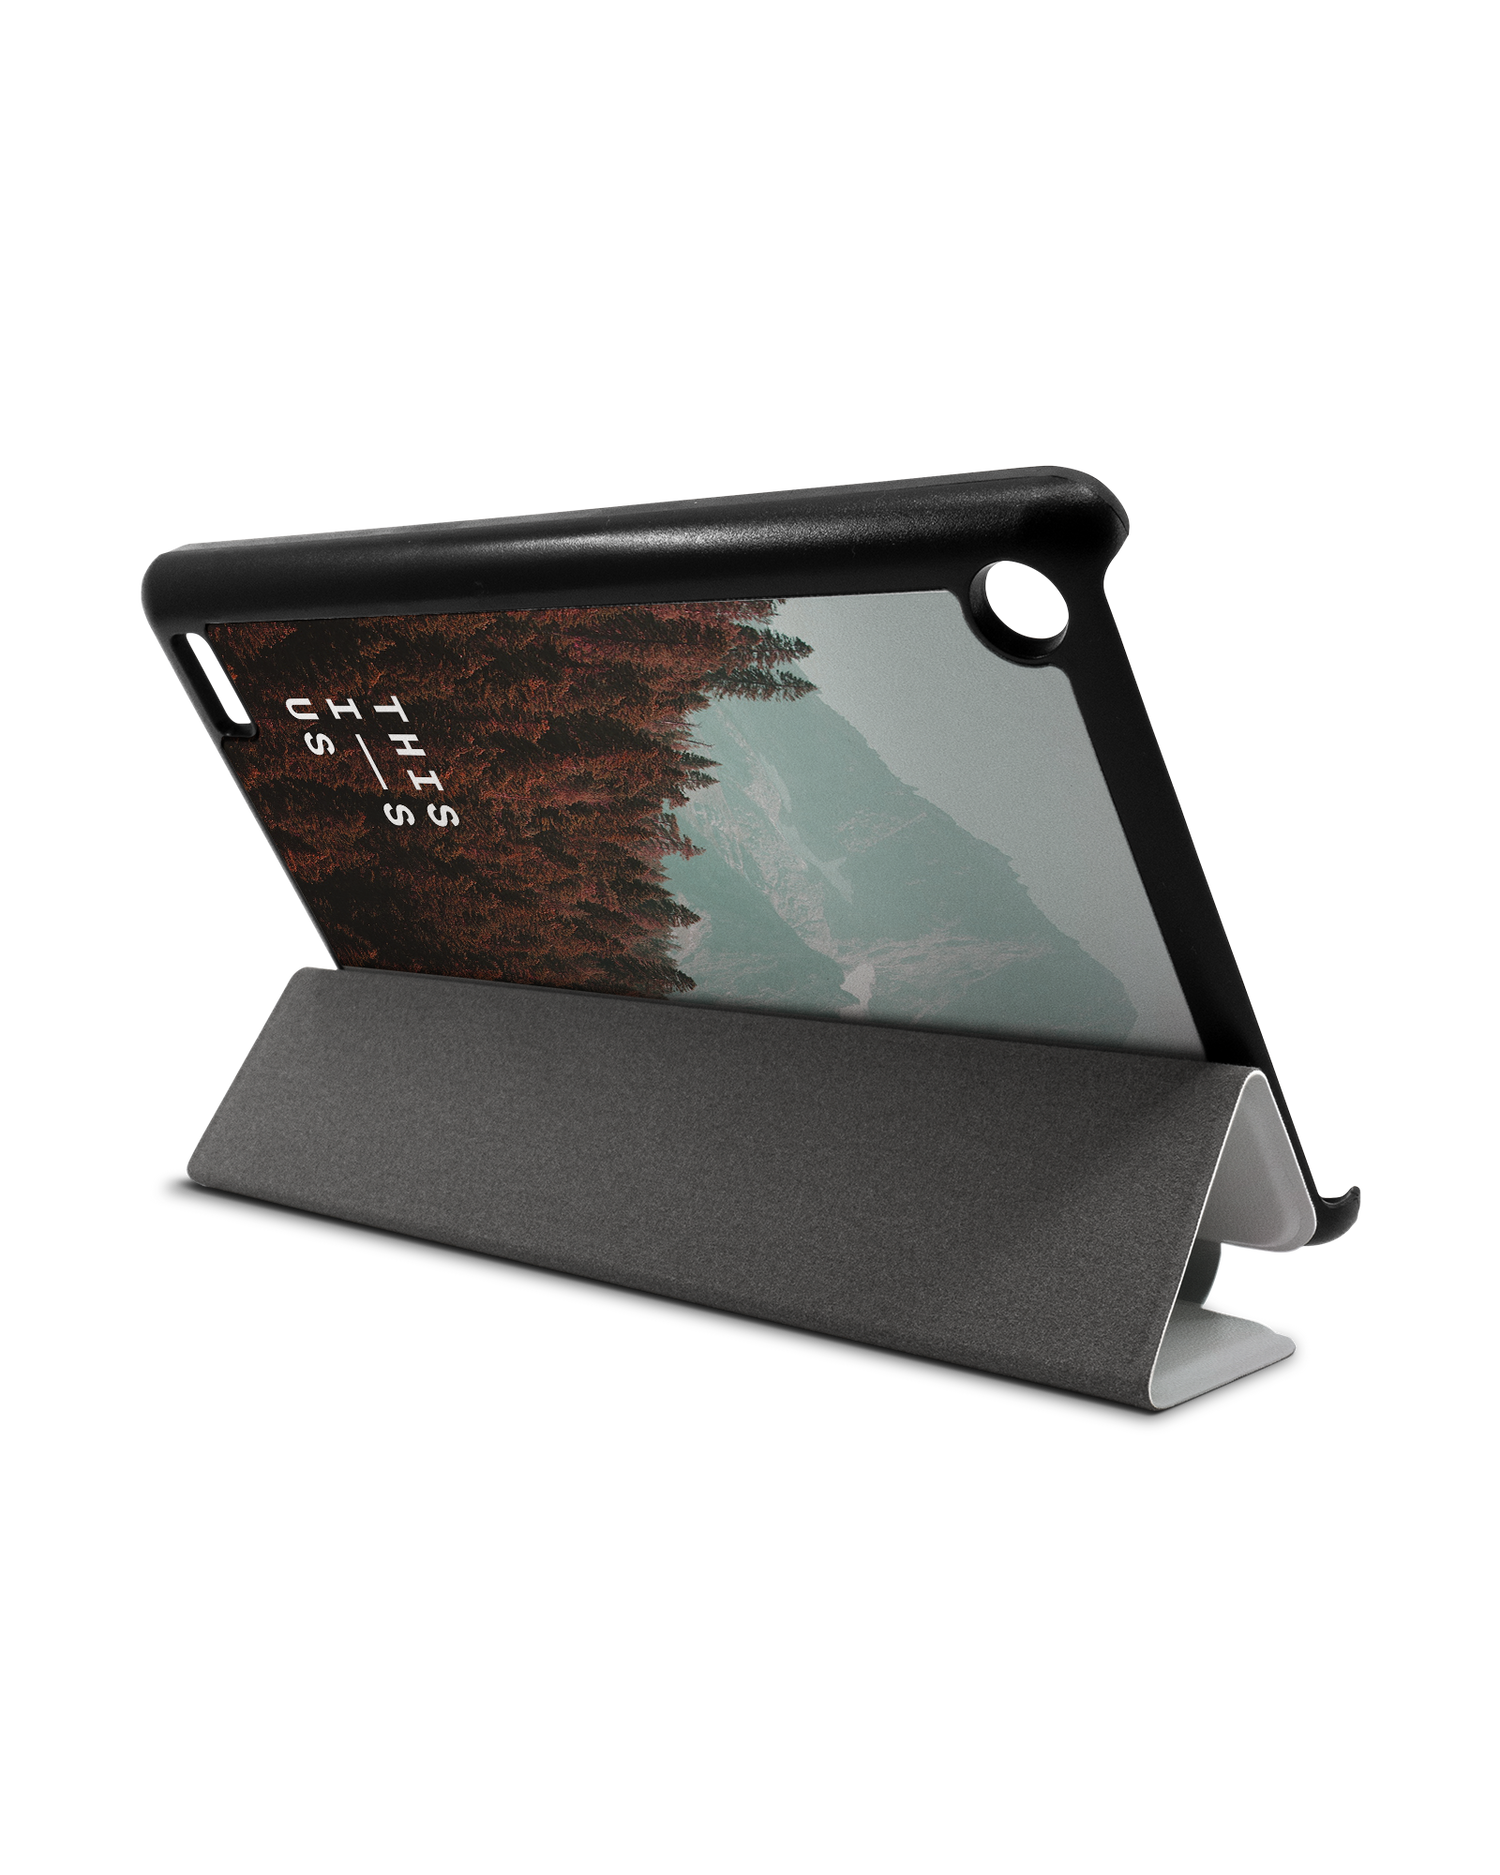 Into the Woods Tablet Smart Case for Amazon Fire 7: Used as Stand